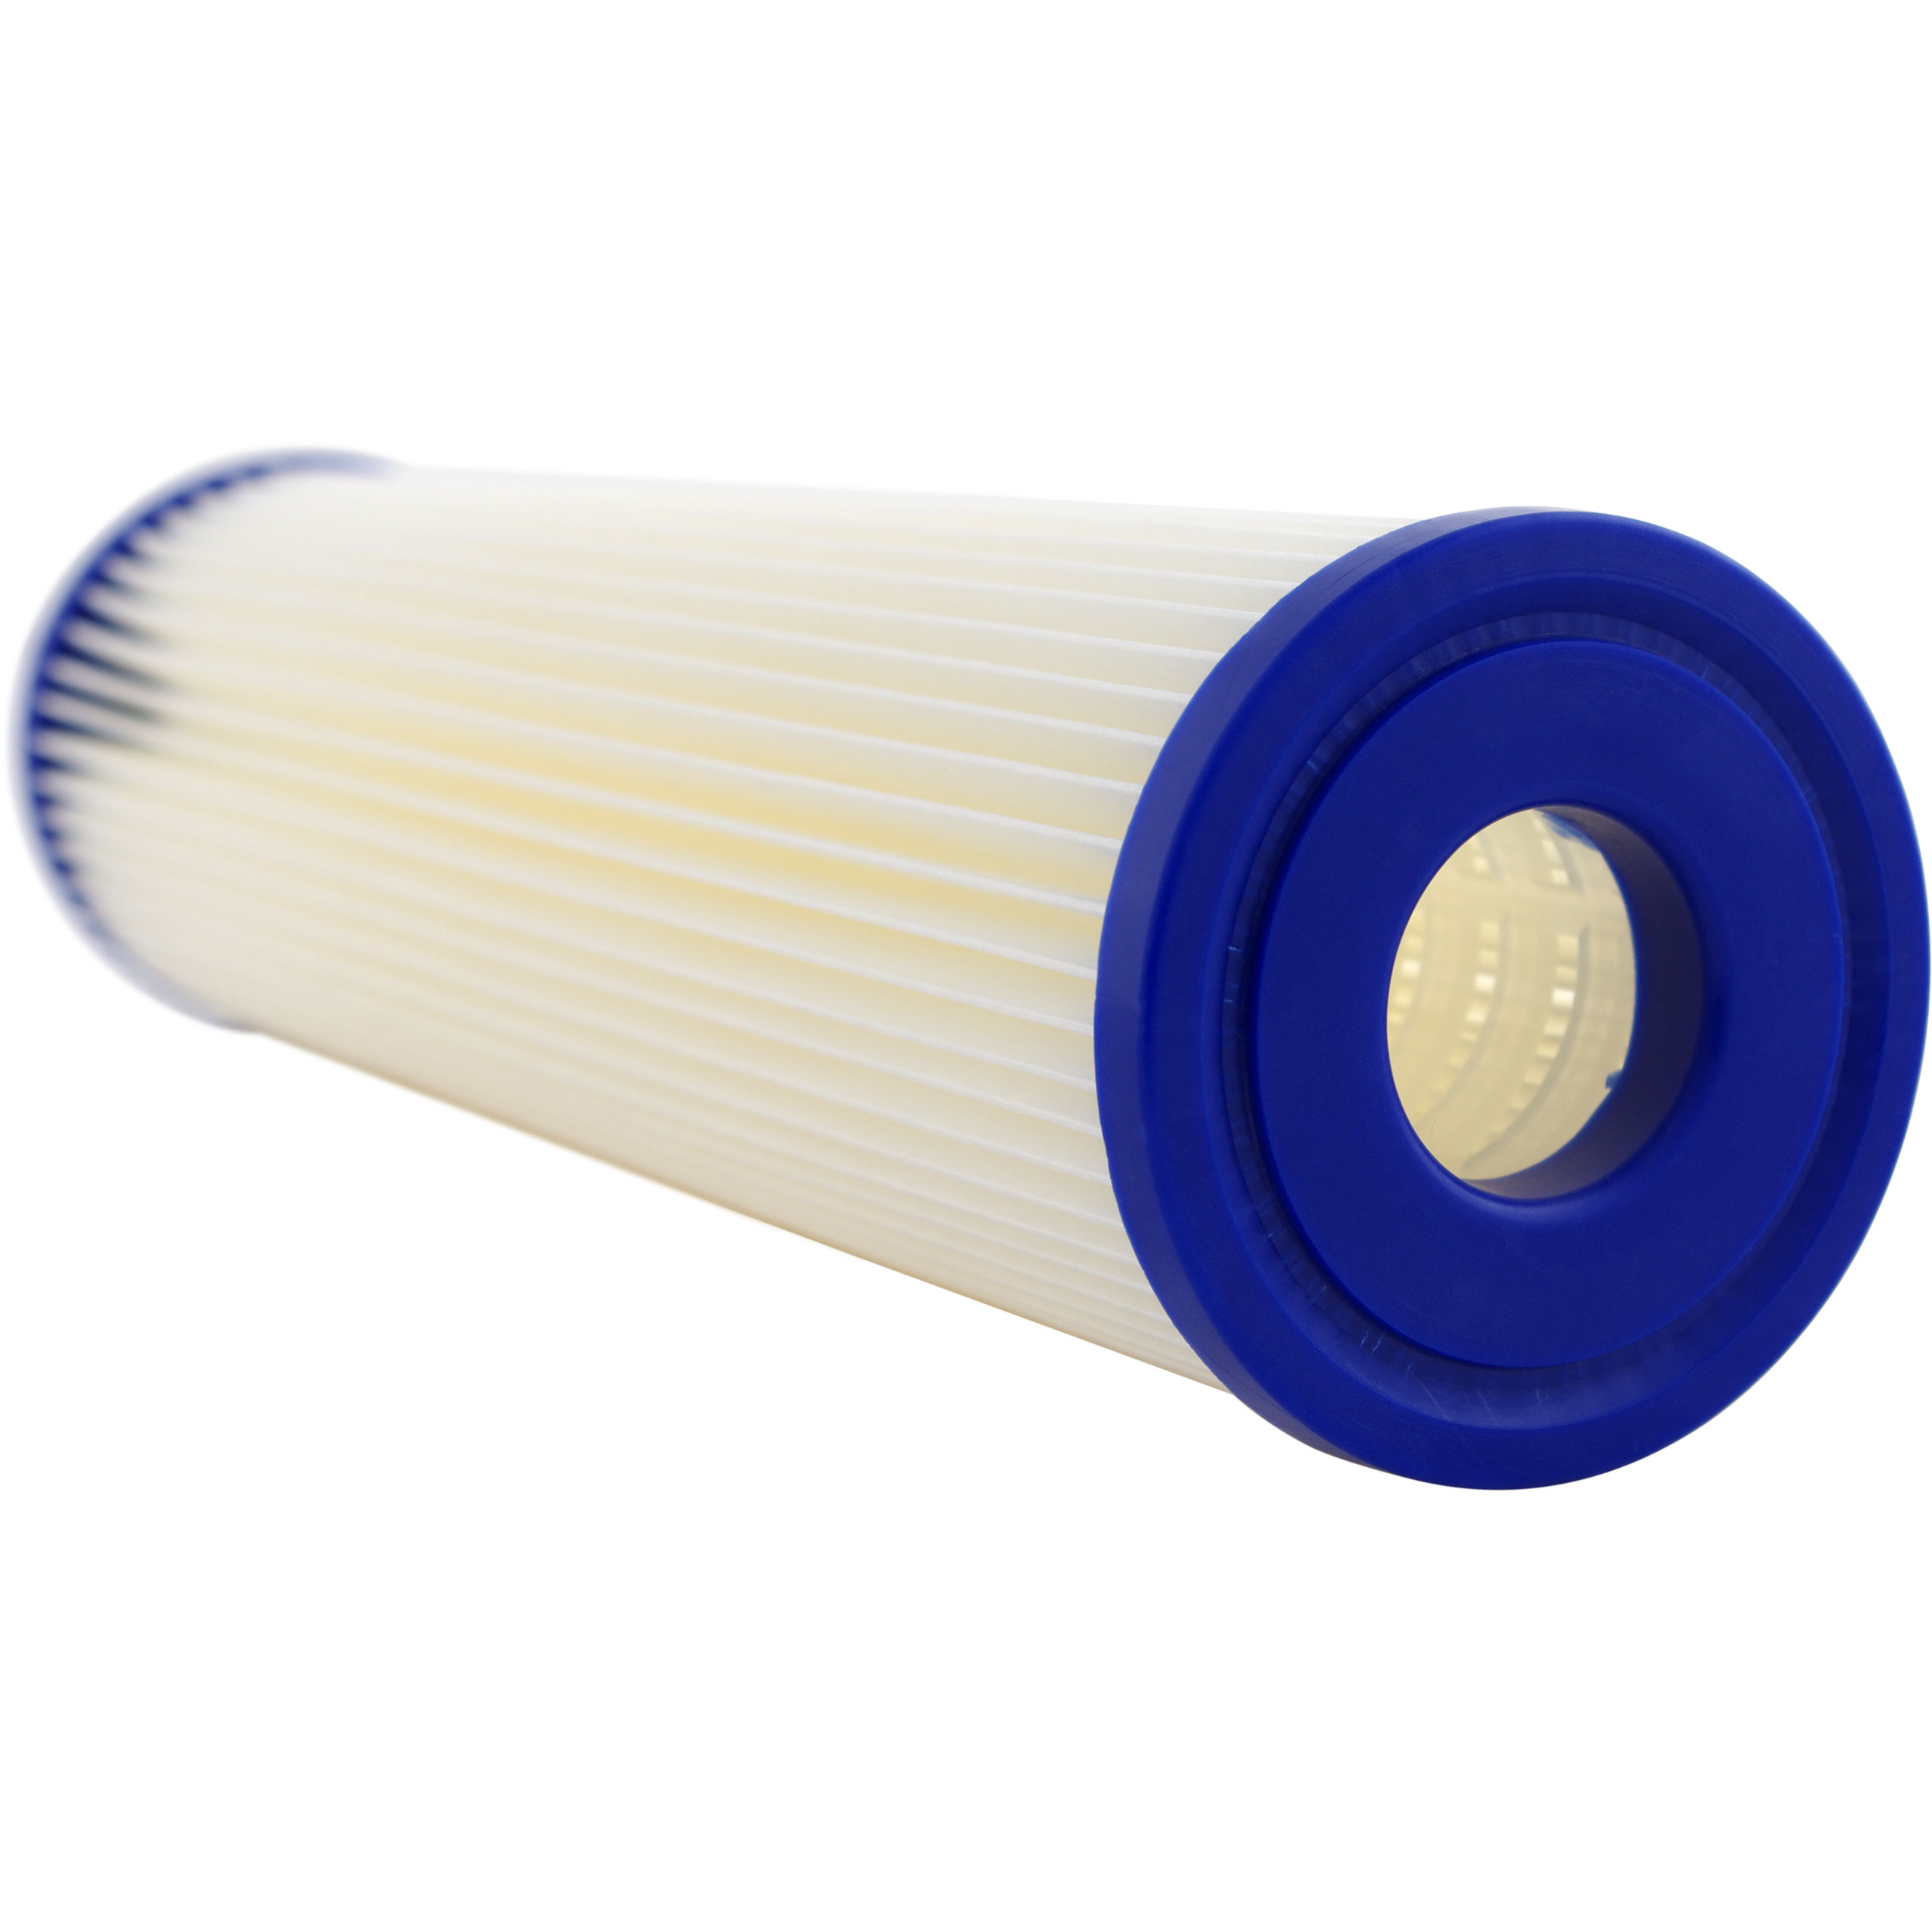 SP-R20 10x2.5 Pleated Polyester Filter Cartridge - $2.70